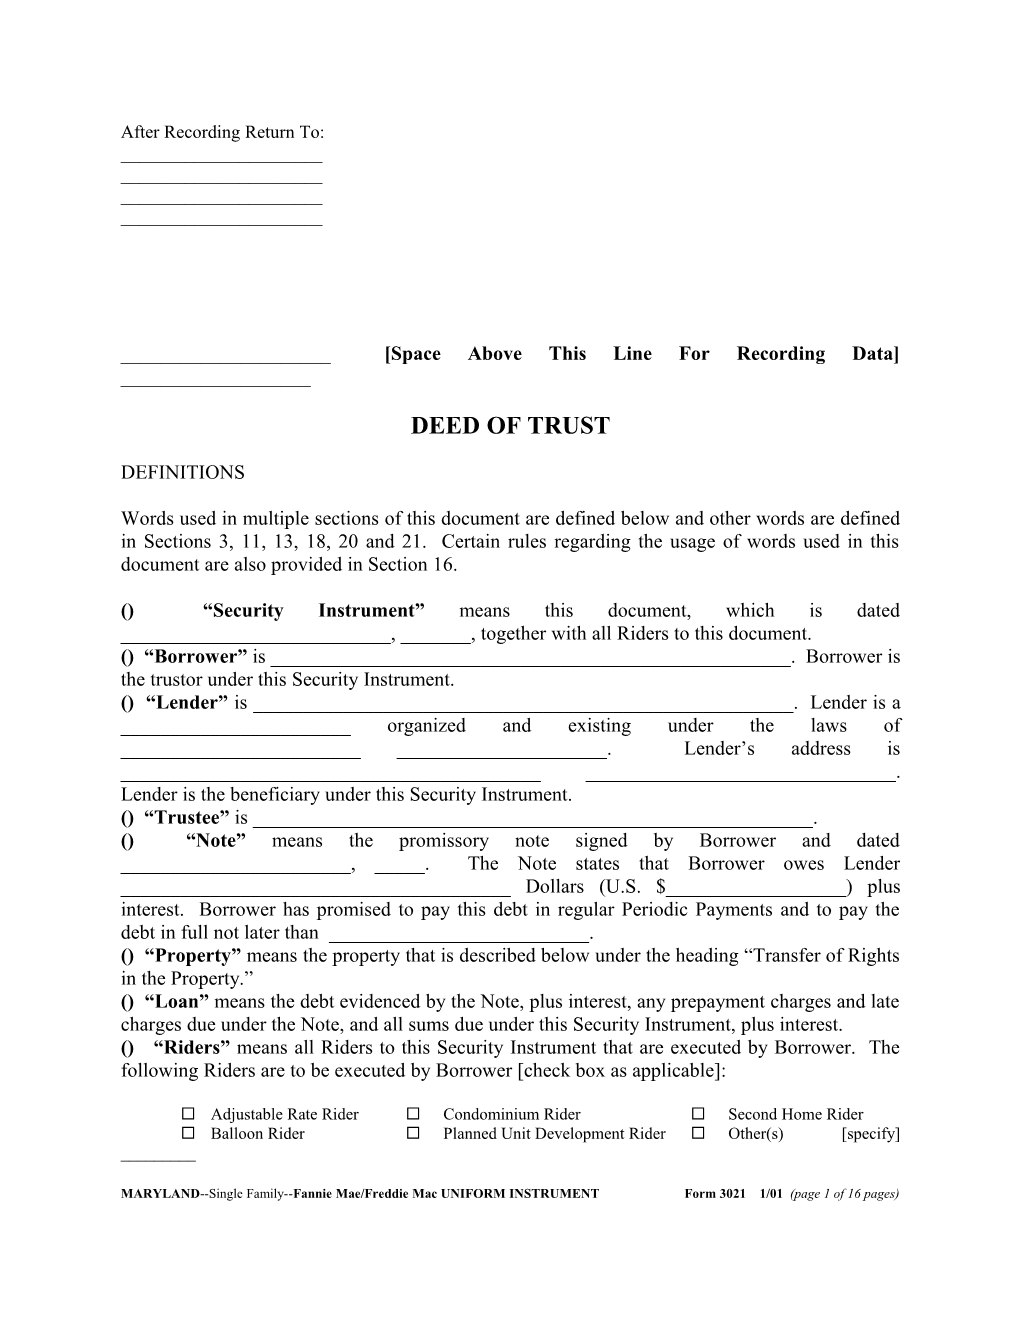 Maryland Security Instrument (Form 3021): Word